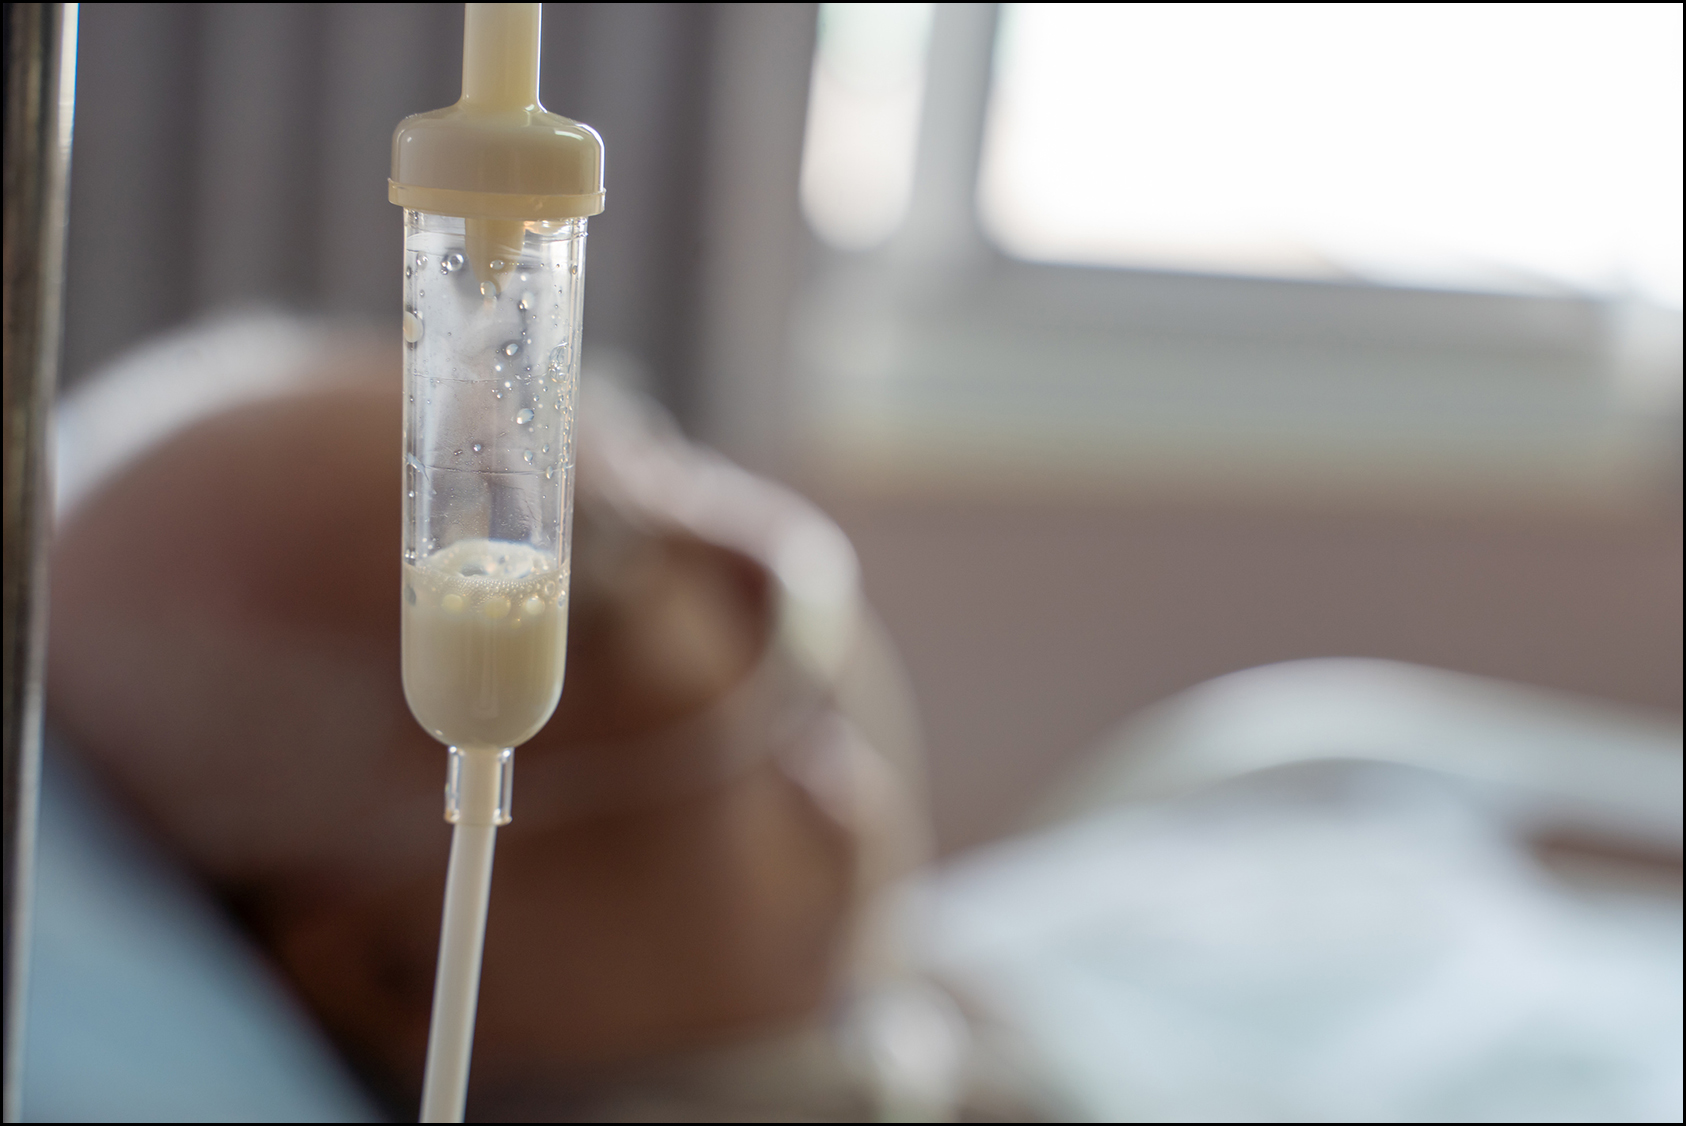 CLoseup of feeding tube holding liquid nutrition for hospital patient